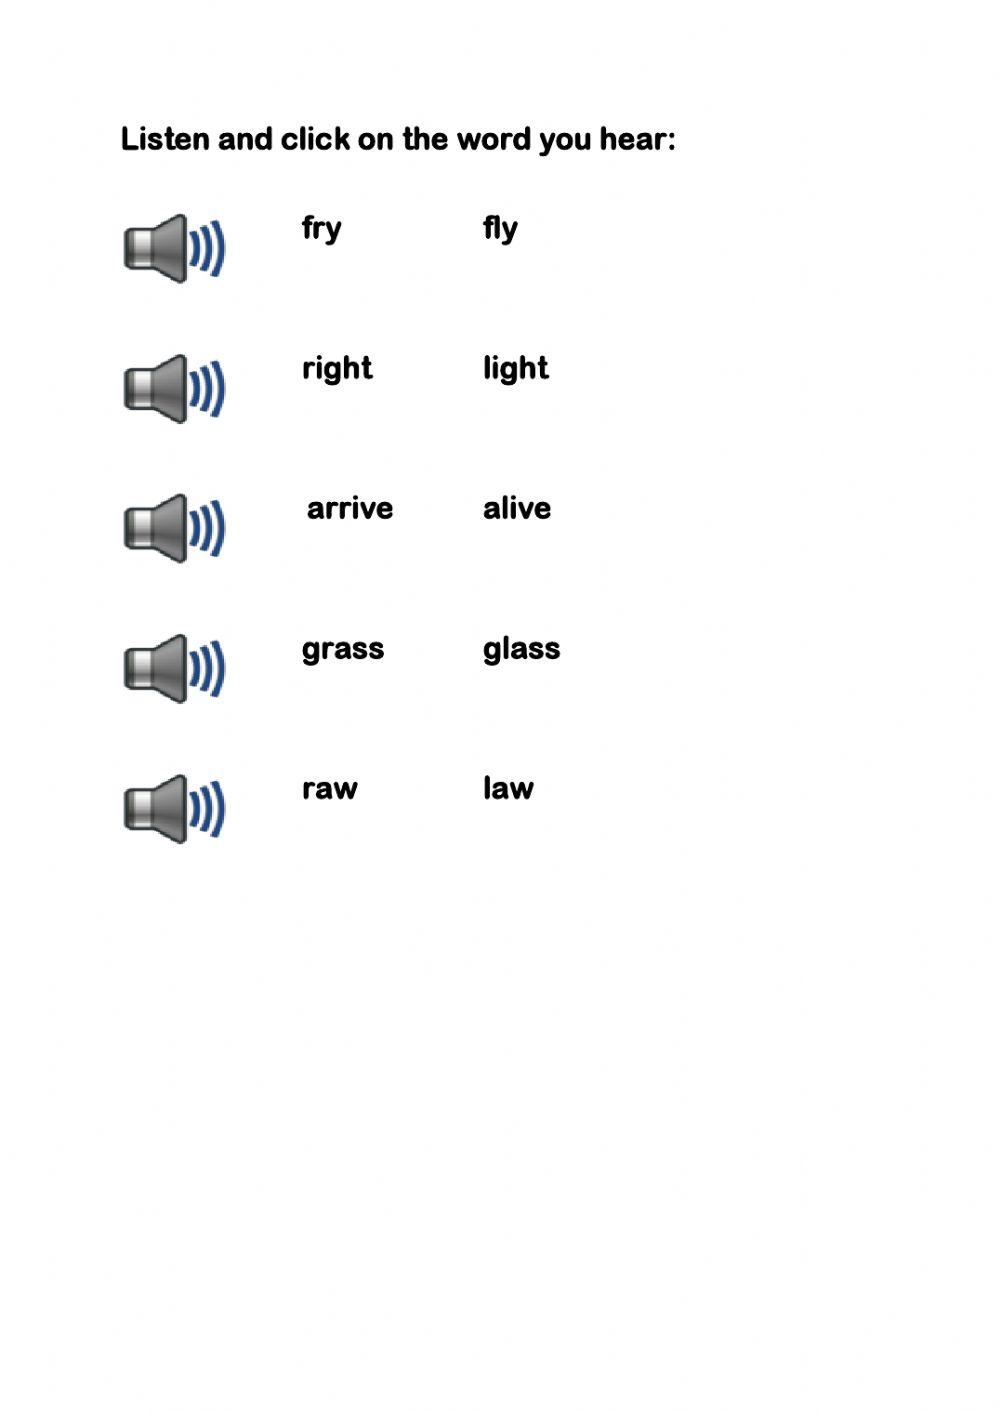 Minimal Pairs exercise  for  r and  l  sounds